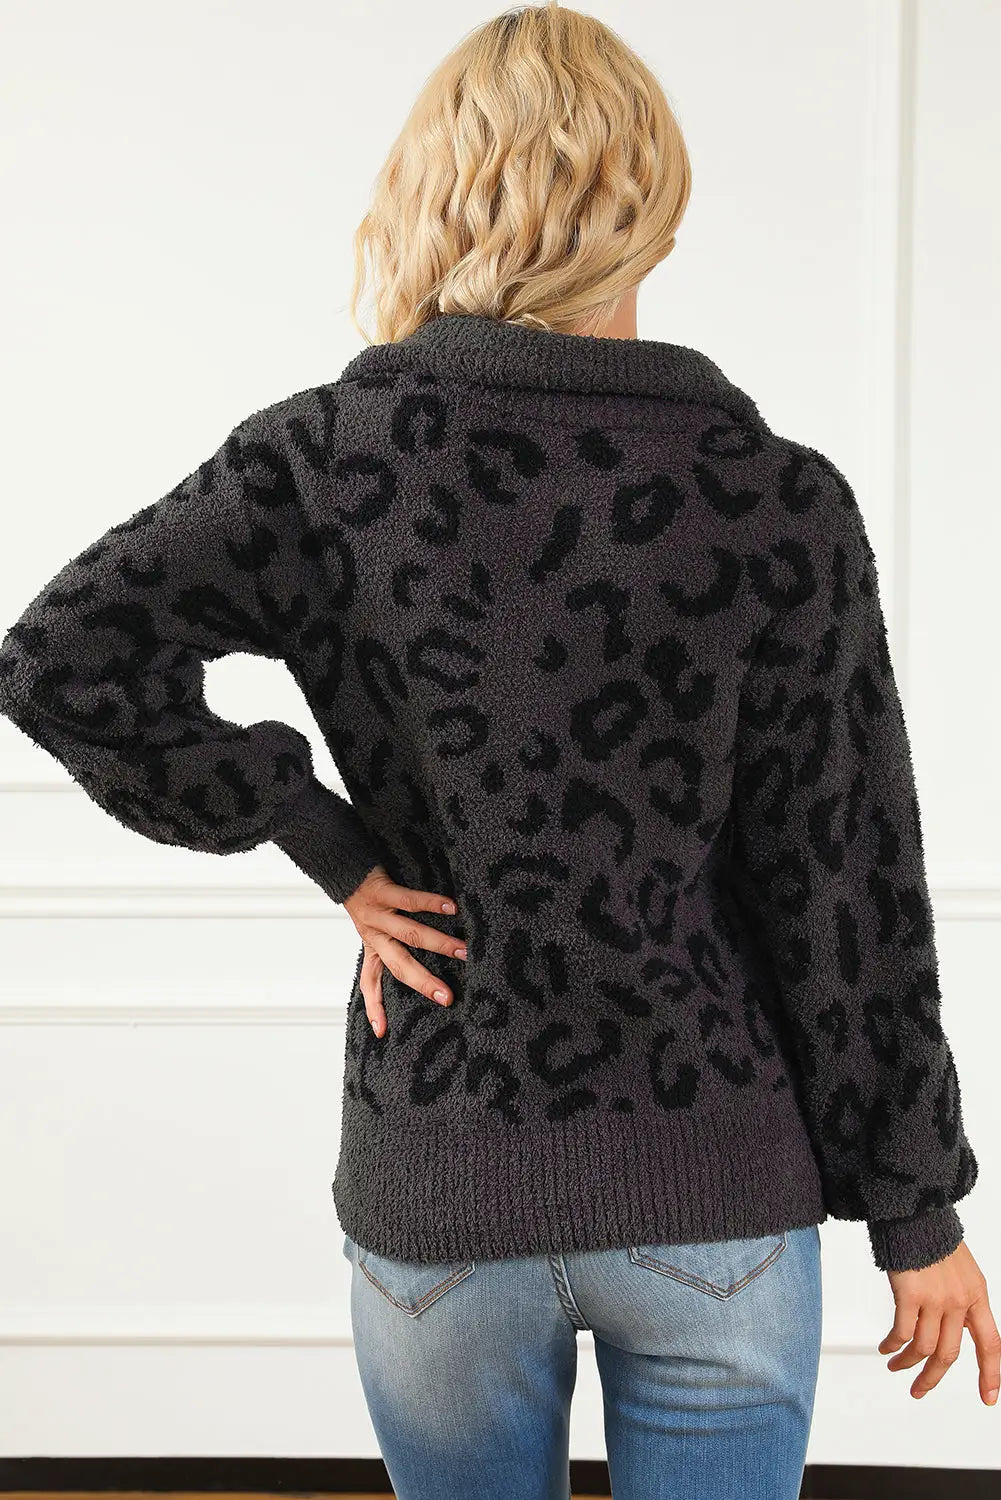 Leopard animal print zipped collared sweater - sweaters & cardigans